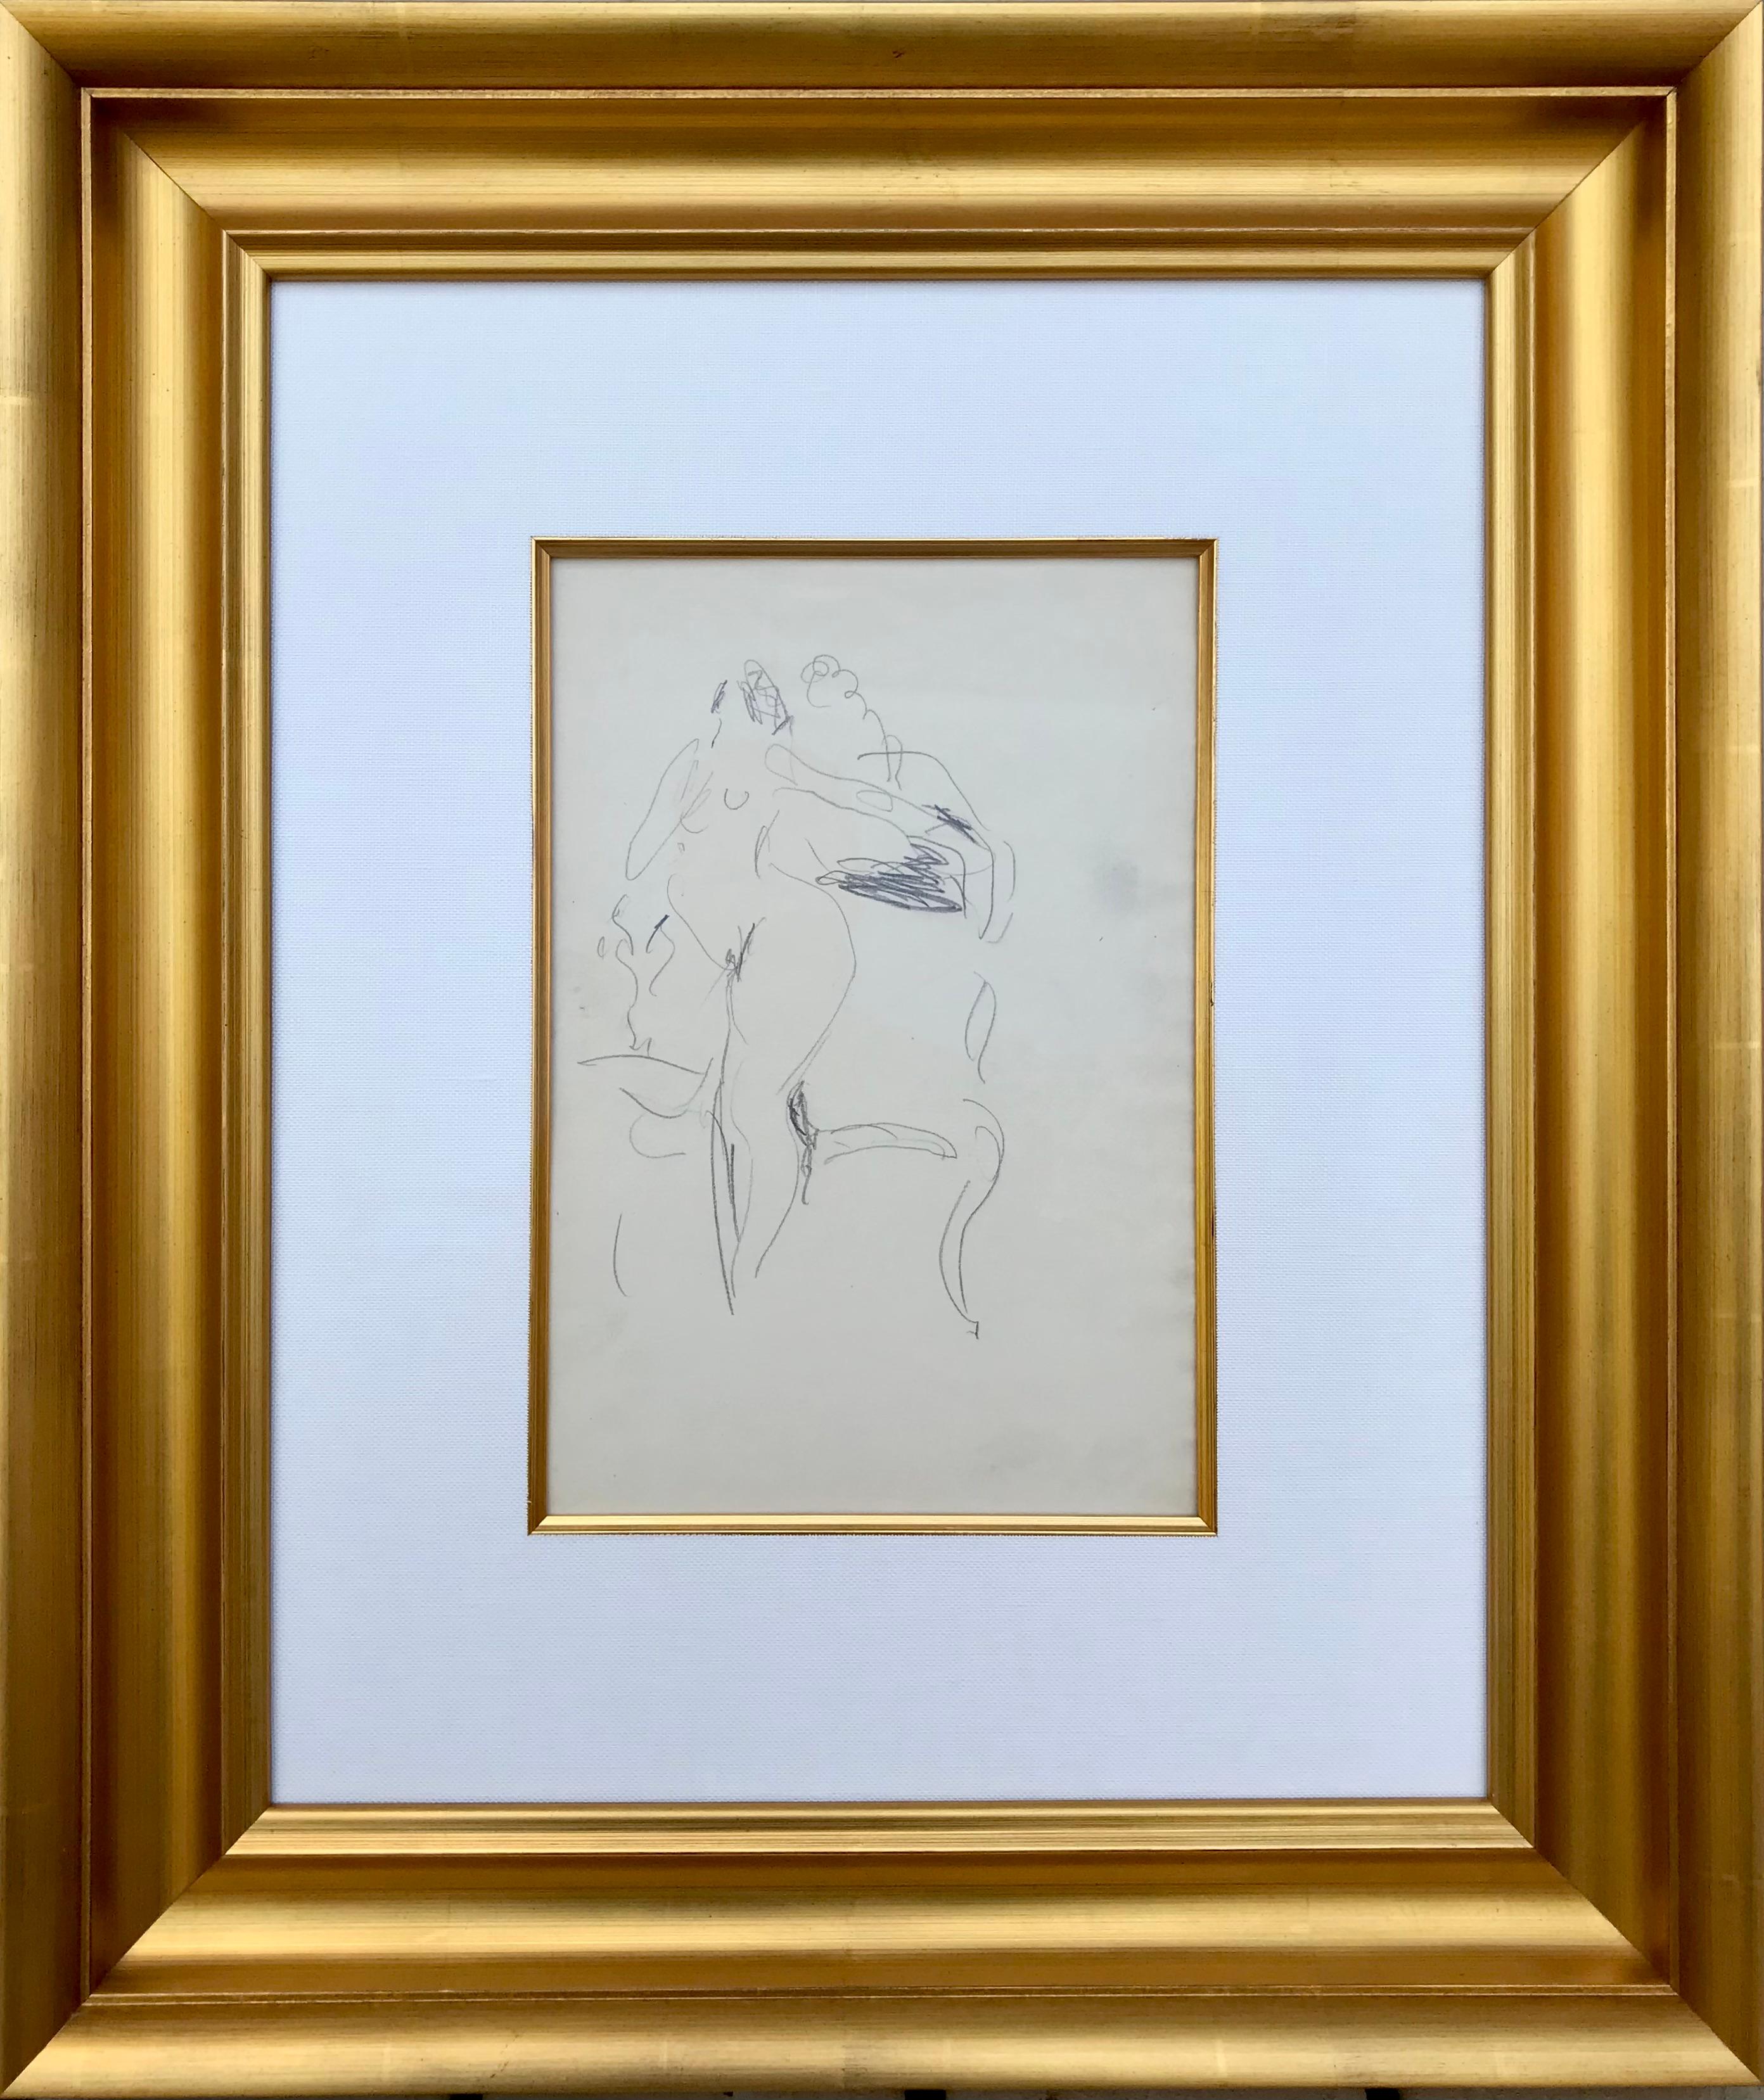 Henri Matisse Original Pencil On Paper Study Of A Standing Nude Next To Chair
Pencil on paper 
Unsigned.
Sheet: 8.85 x 13.75 Inches 
Framed: 25.6 x 21.6 Inches

The authenticity of this work has been confirmed by Georges Matisse. A catalogued (COA)